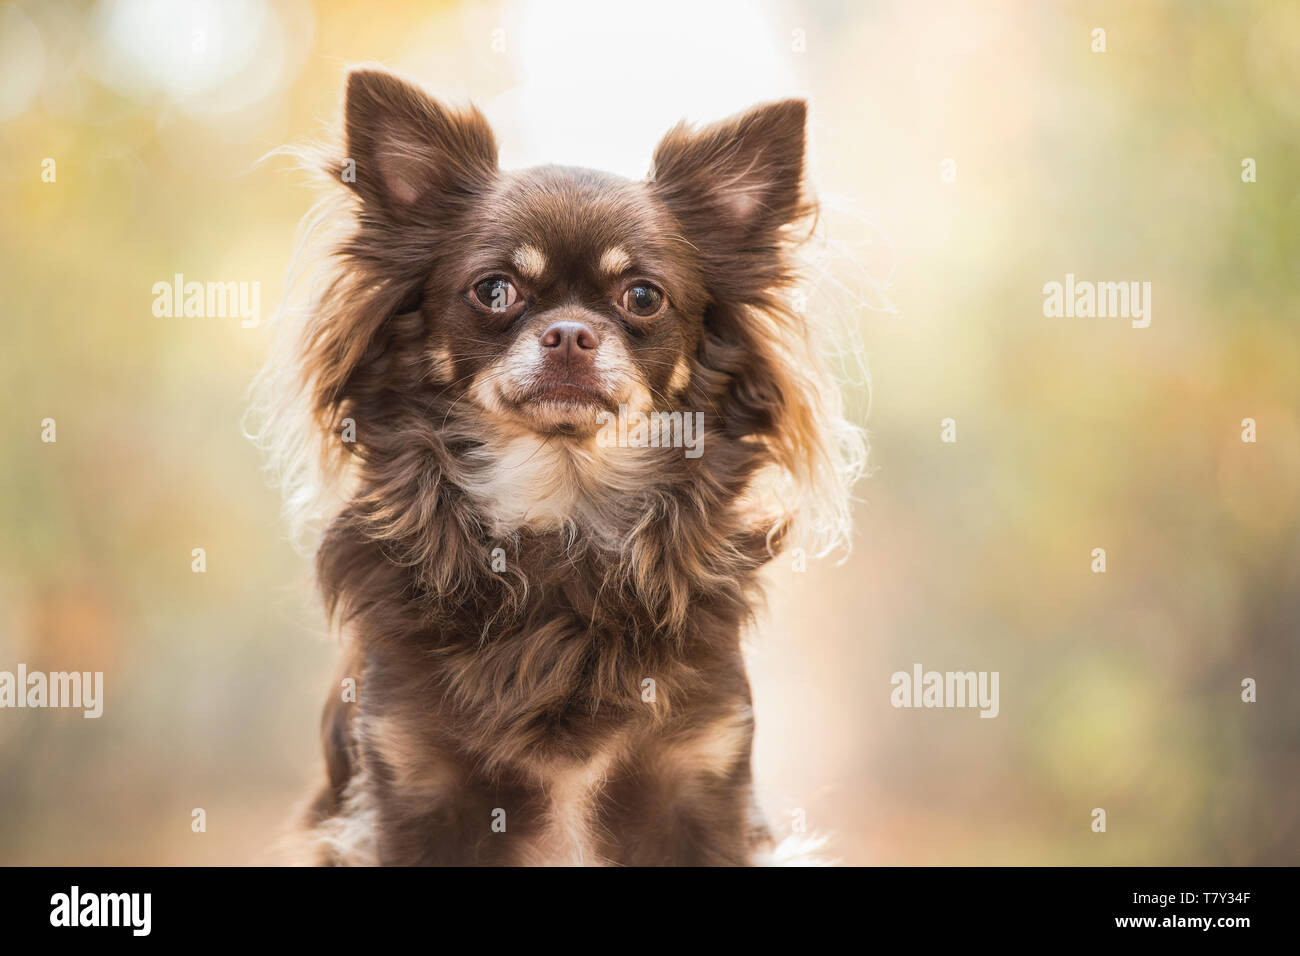 Portrait of a chihuahua dog looking at the camera with counter light on a autumn forest background Stock Photo